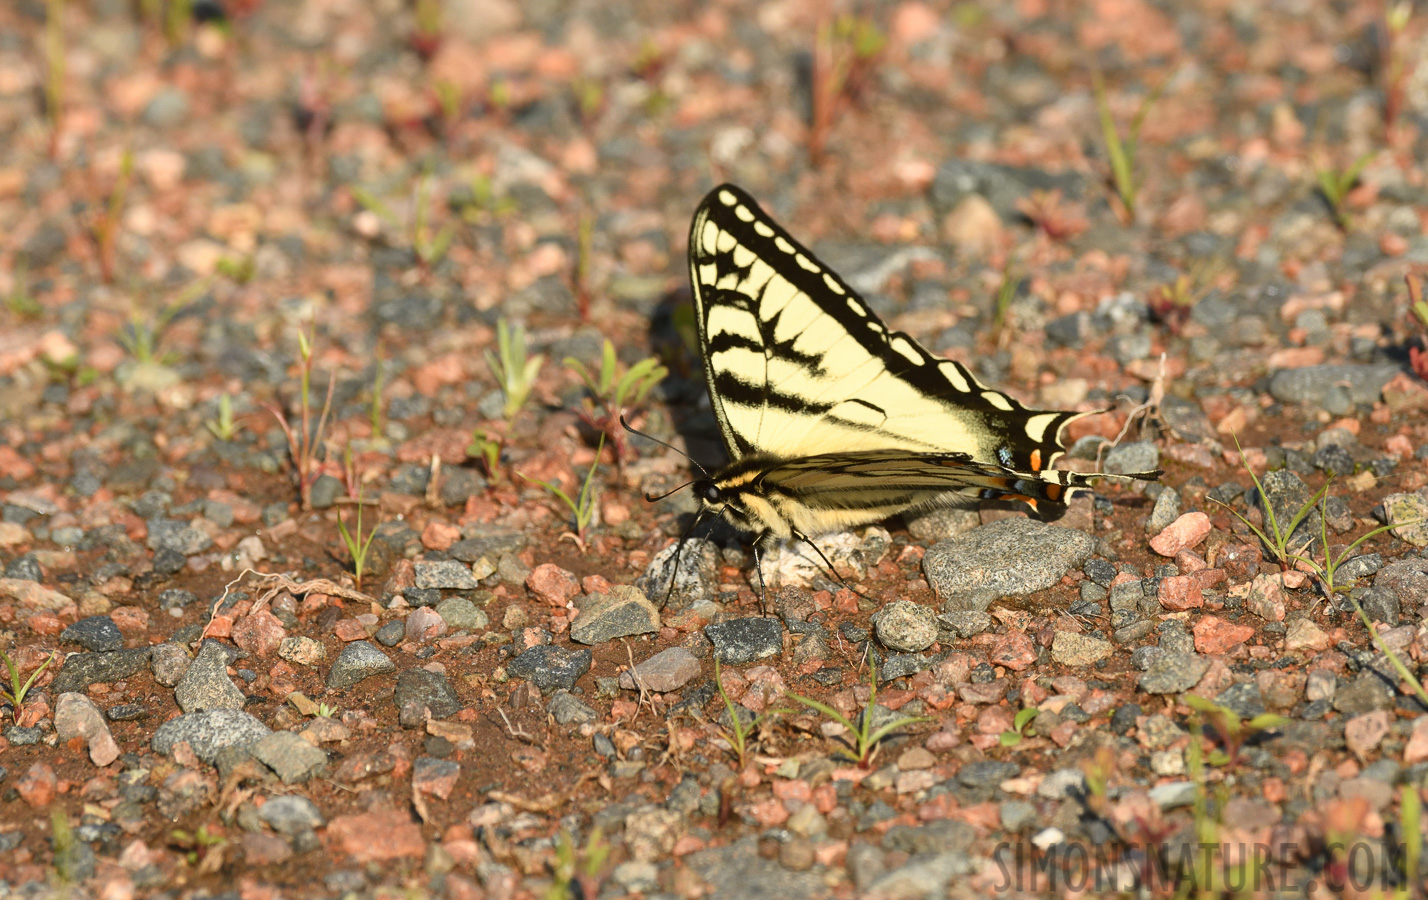 Papilio canadensis [400 mm, 1/640 sec at f / 9.0, ISO 400]